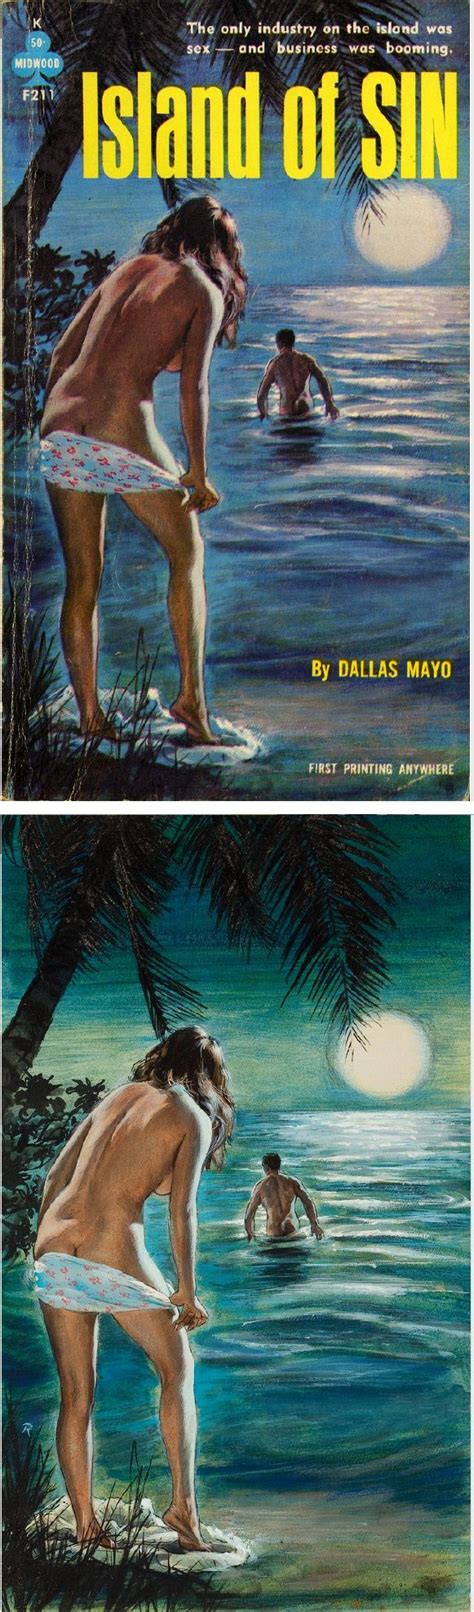 paul rader island of sin by dallas mayo gil fox 1962 midwood books f211 items by